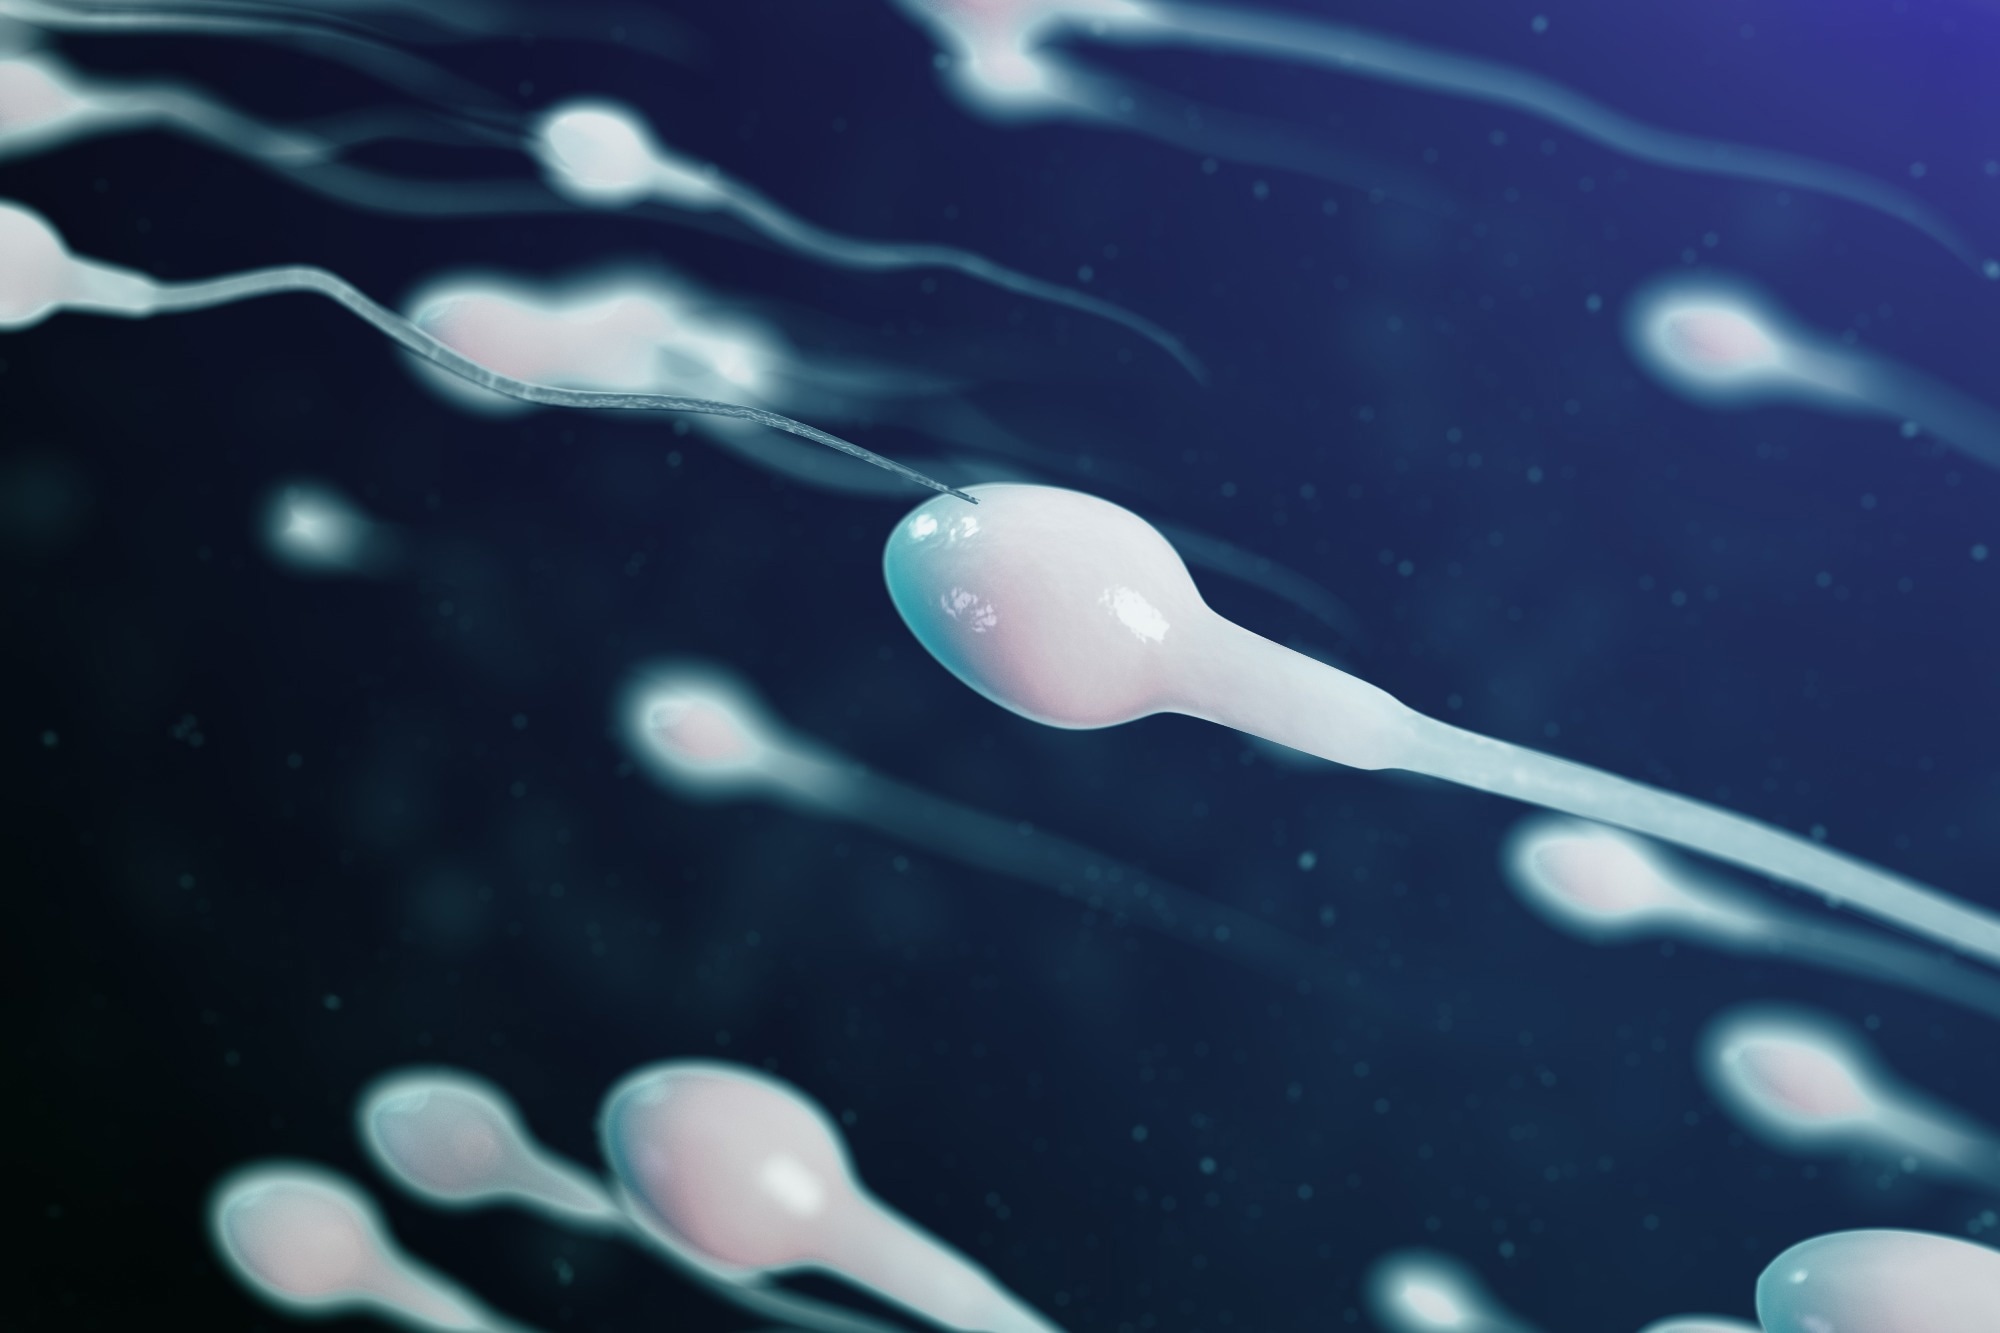 Study: SARS-CoV-2 infection reduces quality of sperm parameters: prospective one year follow-up study in 93 patients. Image Credit: Rost9/Shutterstock.com